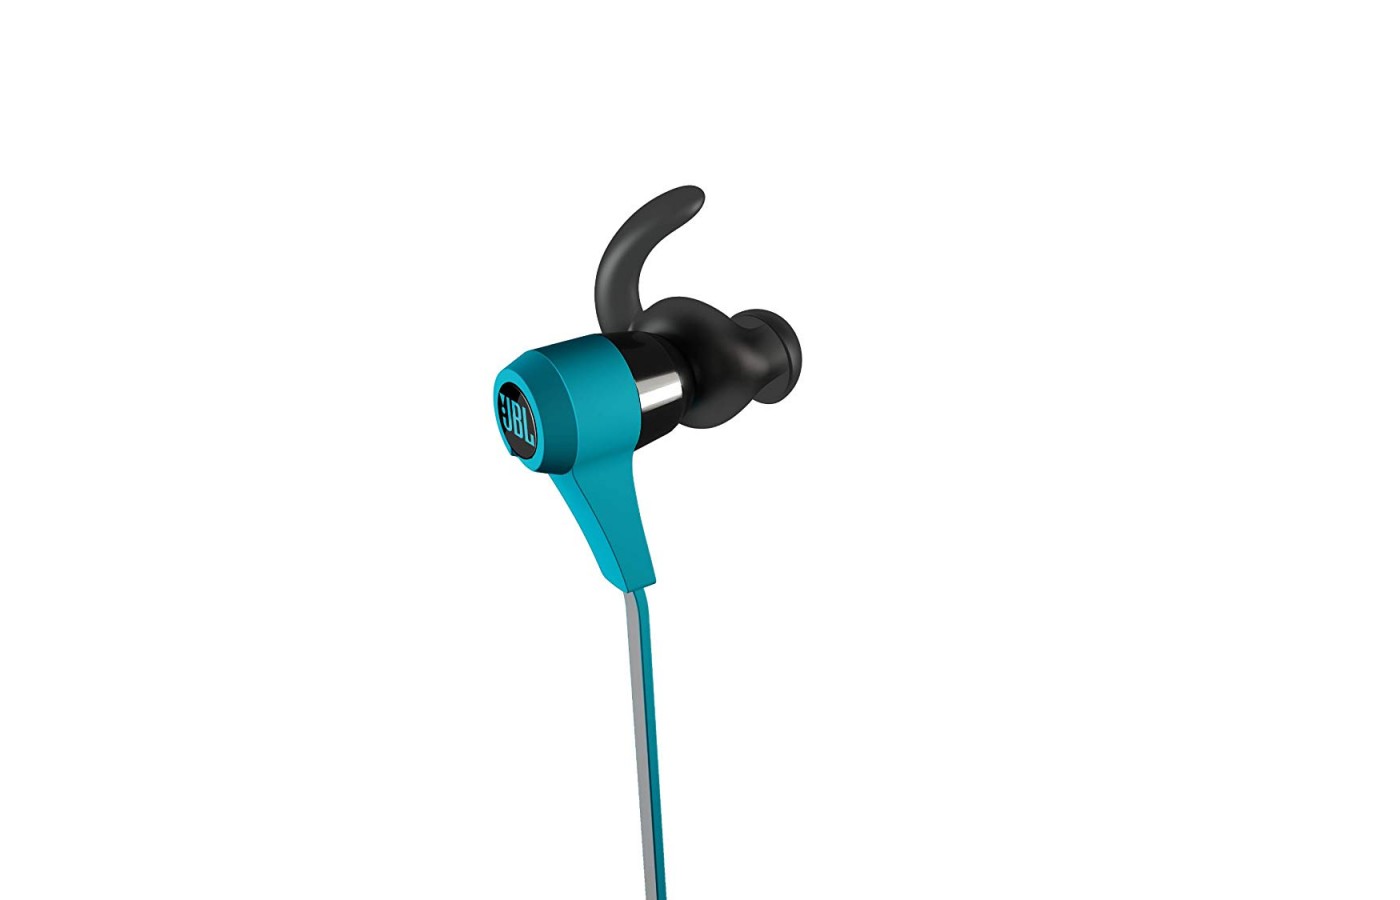 Audio and music are streamed with a Bluetooth connection from a smartphone to the headphones. 